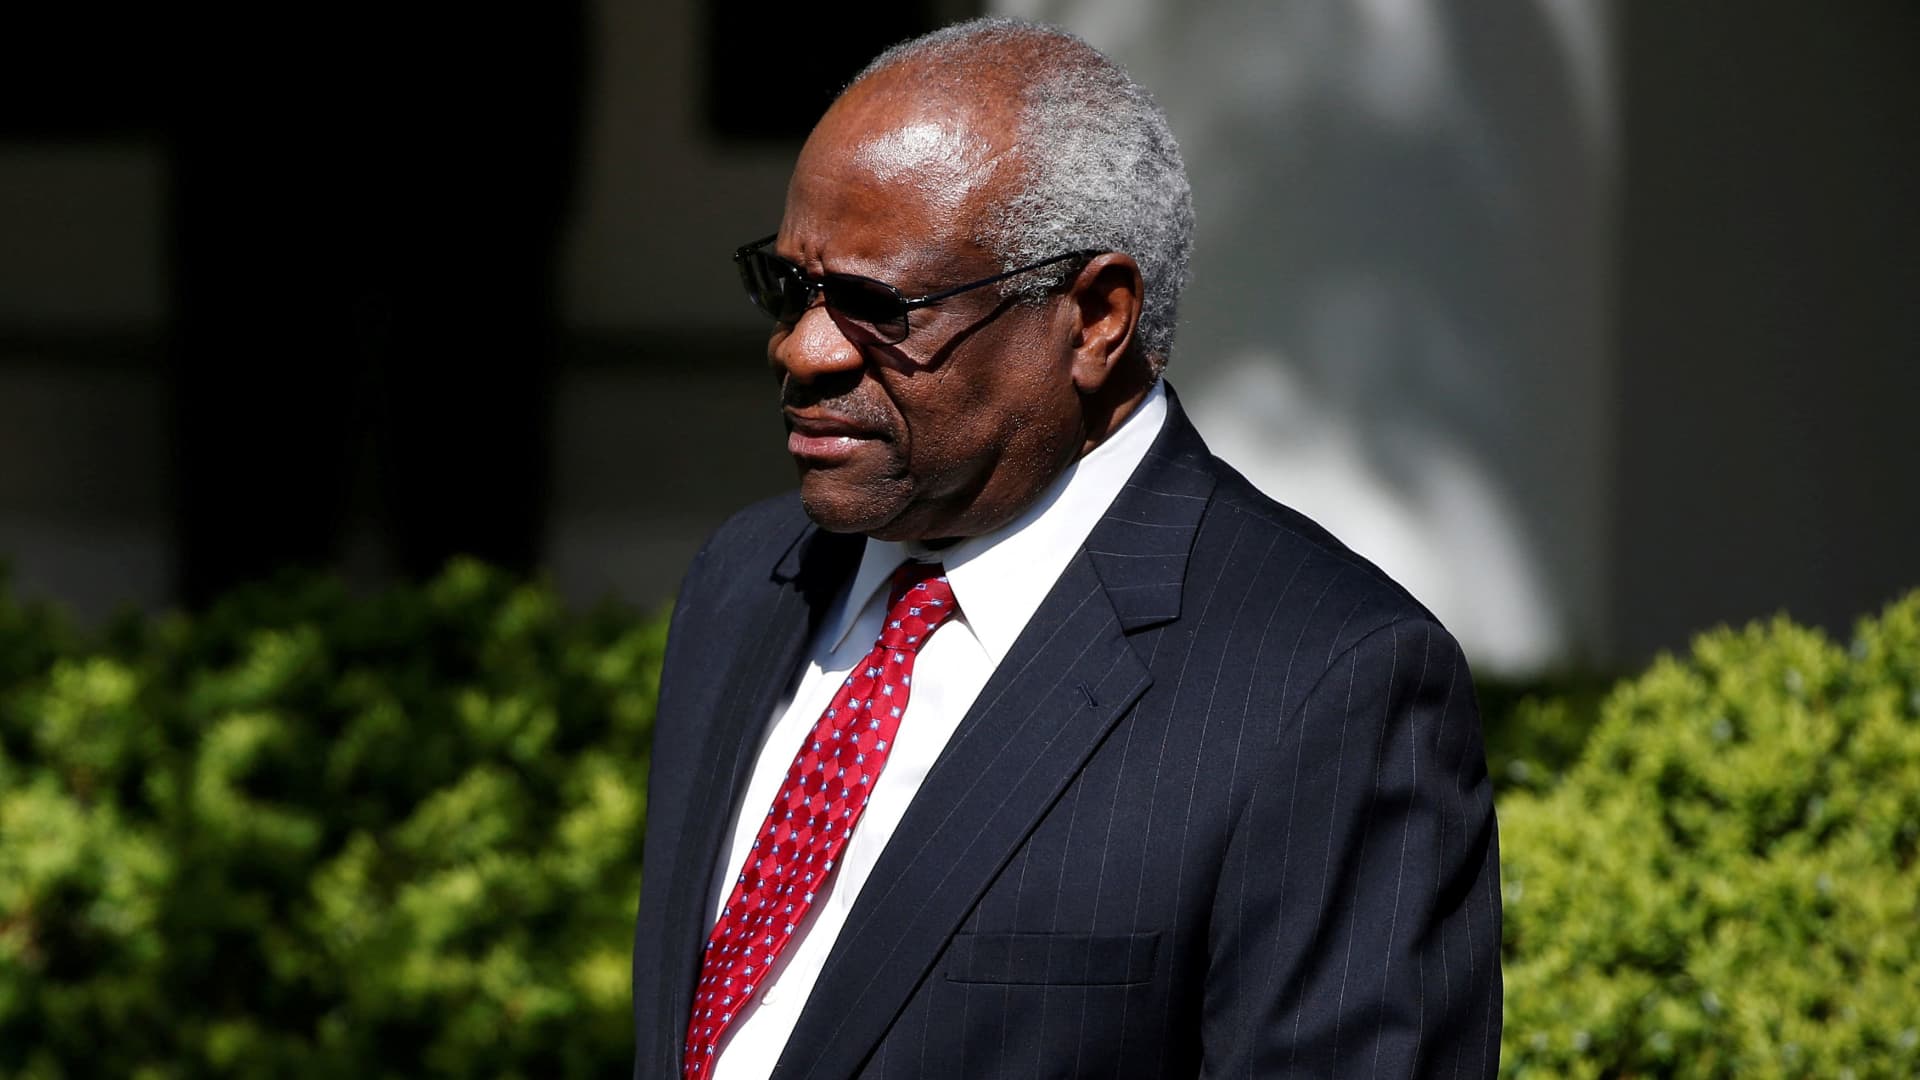 Supreme Court Justice Clarence Thomas reportedly has been claiming thousands of dollars annually from a shuttered real estate firm